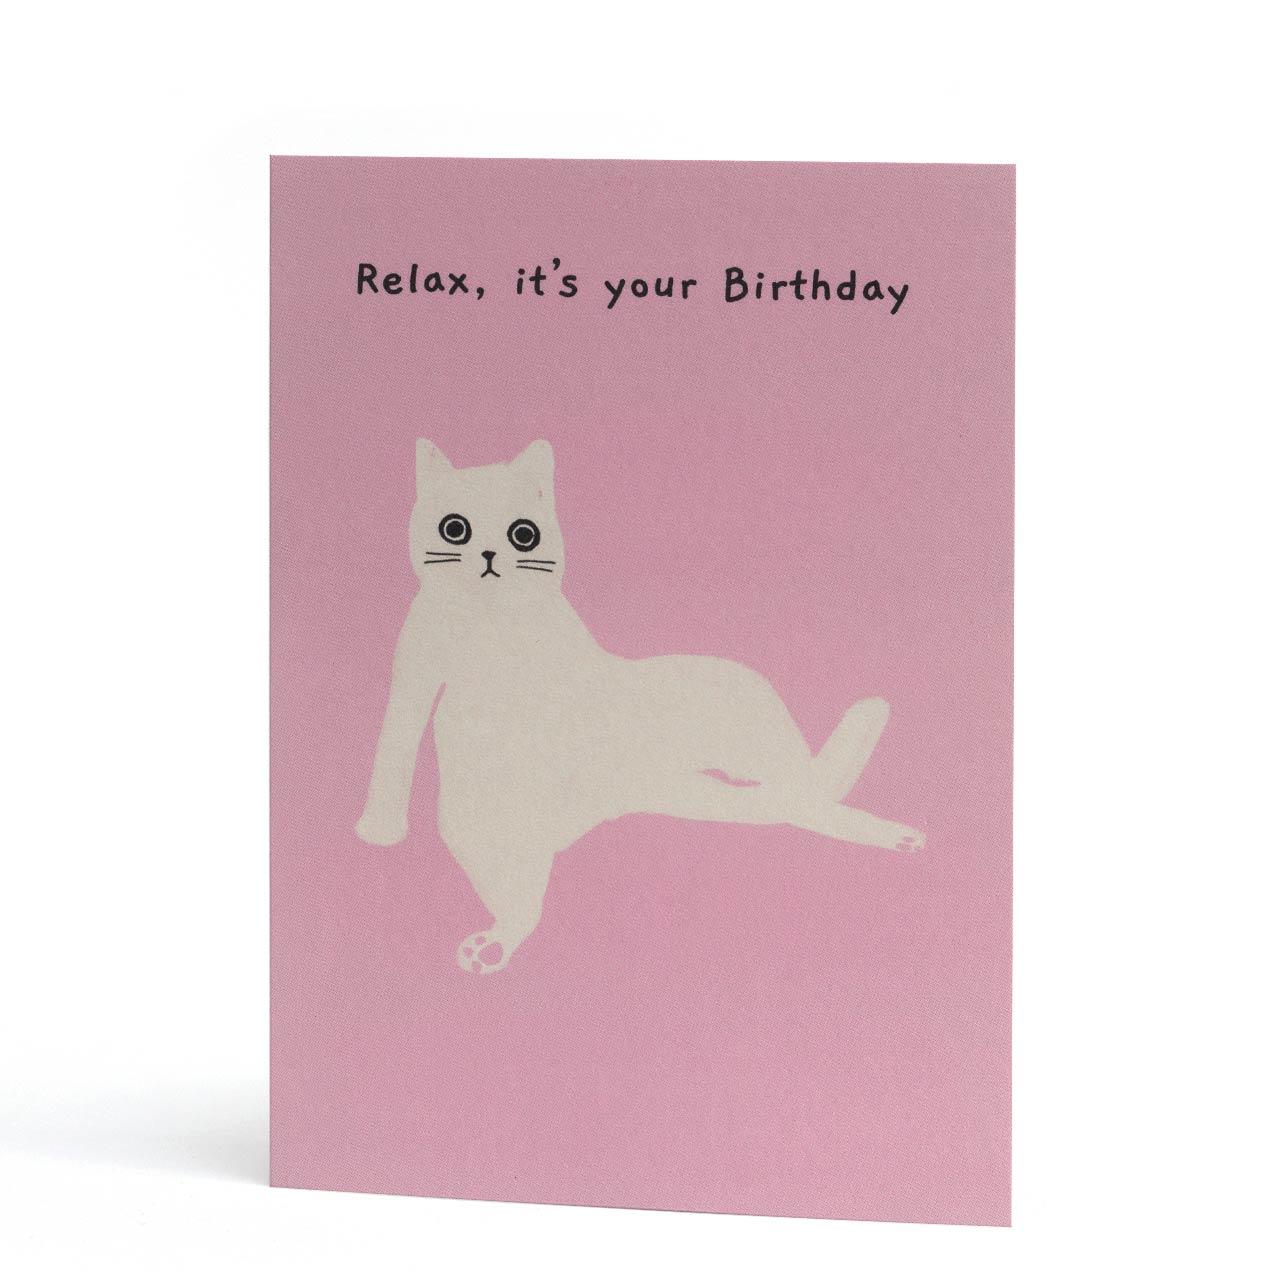 Relax, It's Your Birthday Card